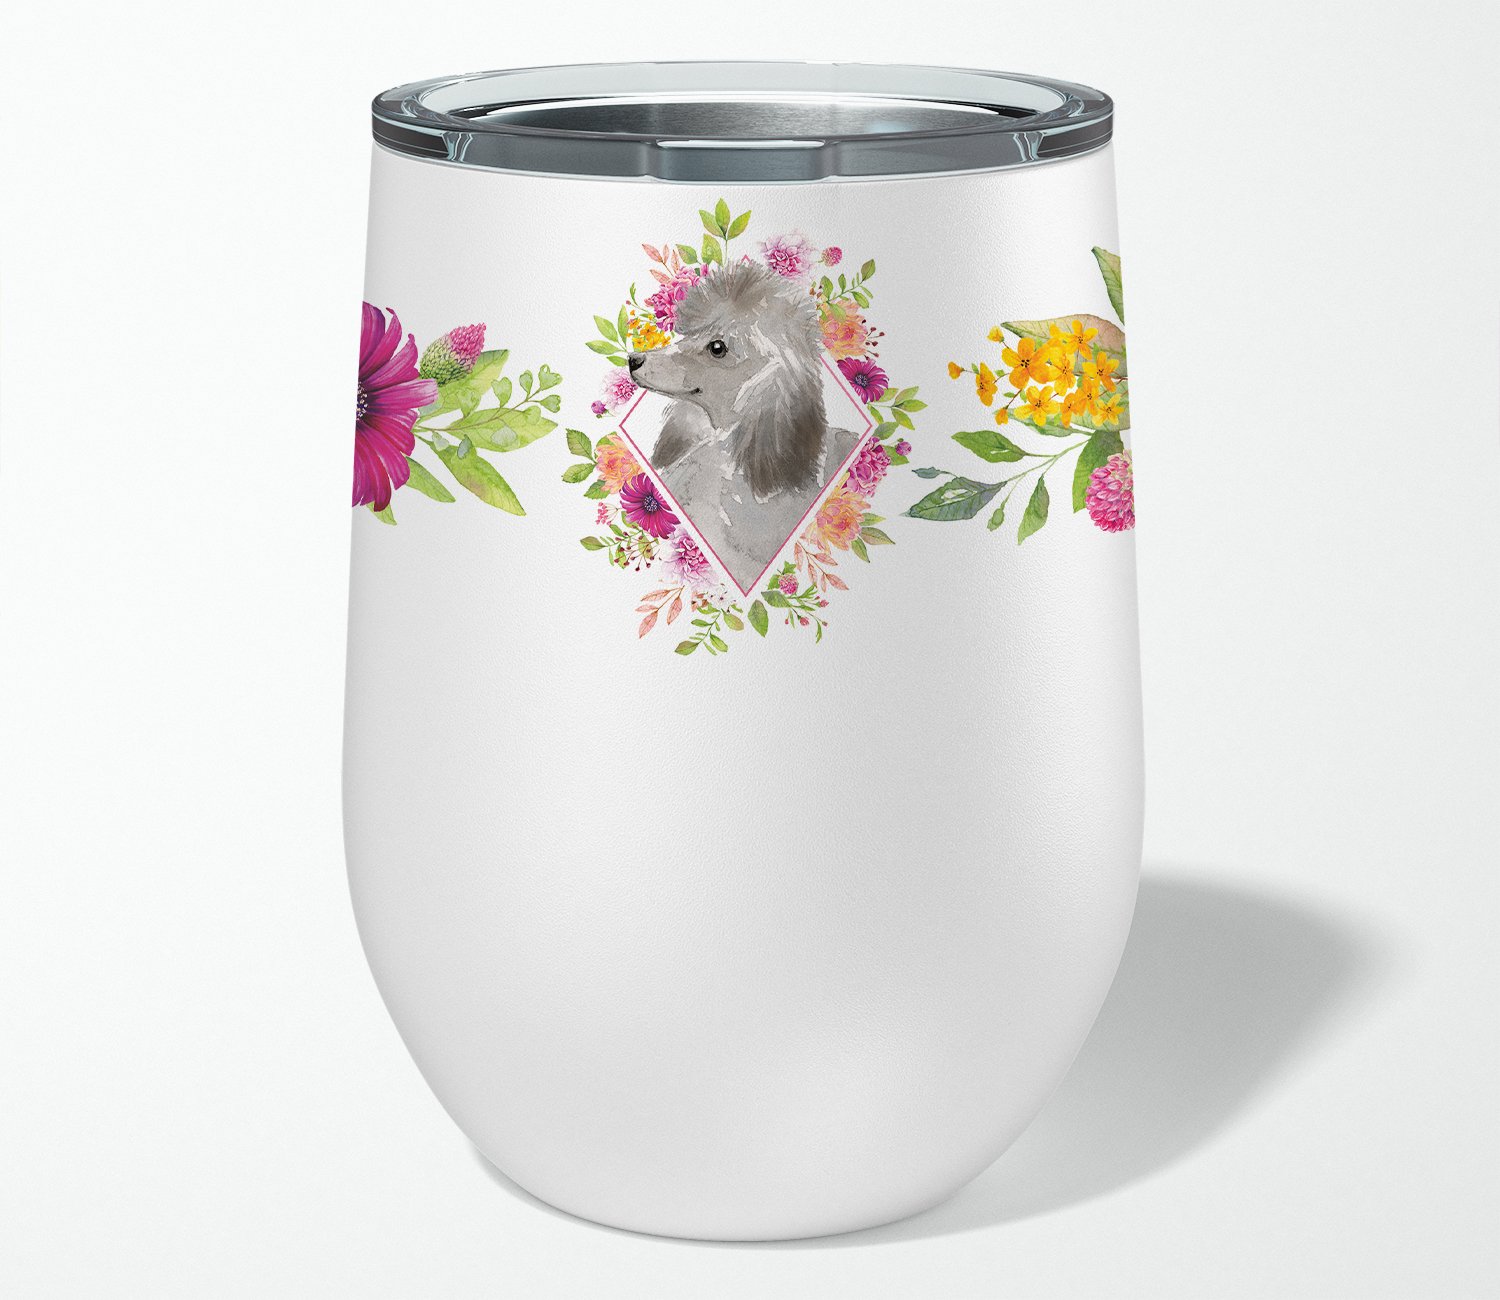 Grey Standard Poodle Pink Flowers Stainless Steel 12 oz Stemless Wine Glass CK4233TBL12 by Caroline's Treasures